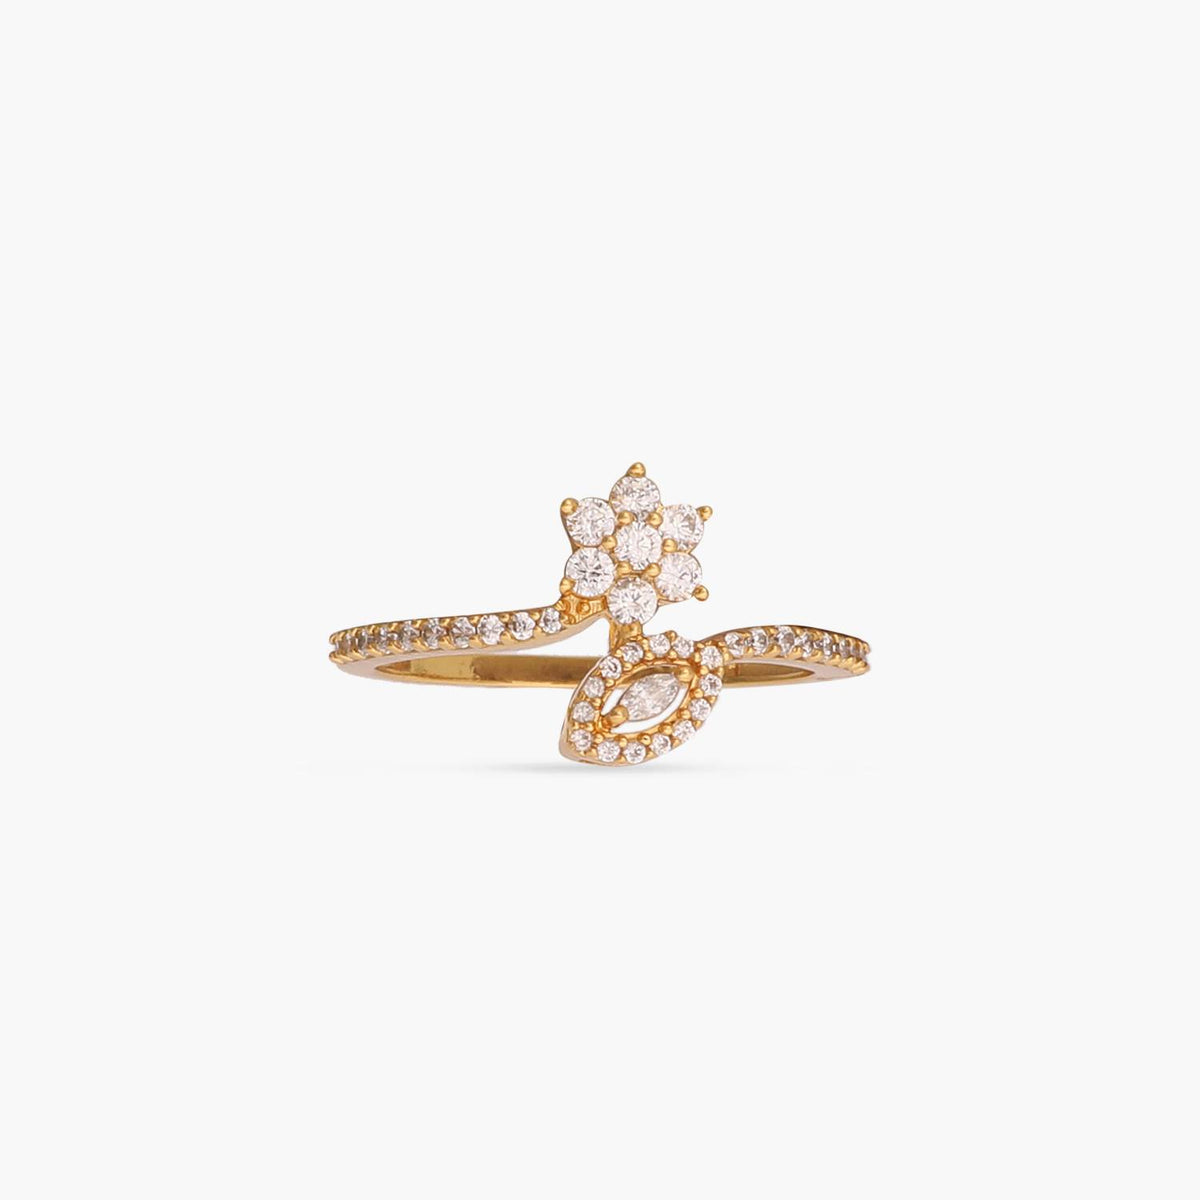 Idylle Blossom Hoops, Yellow Gold And Diamonds - Categories